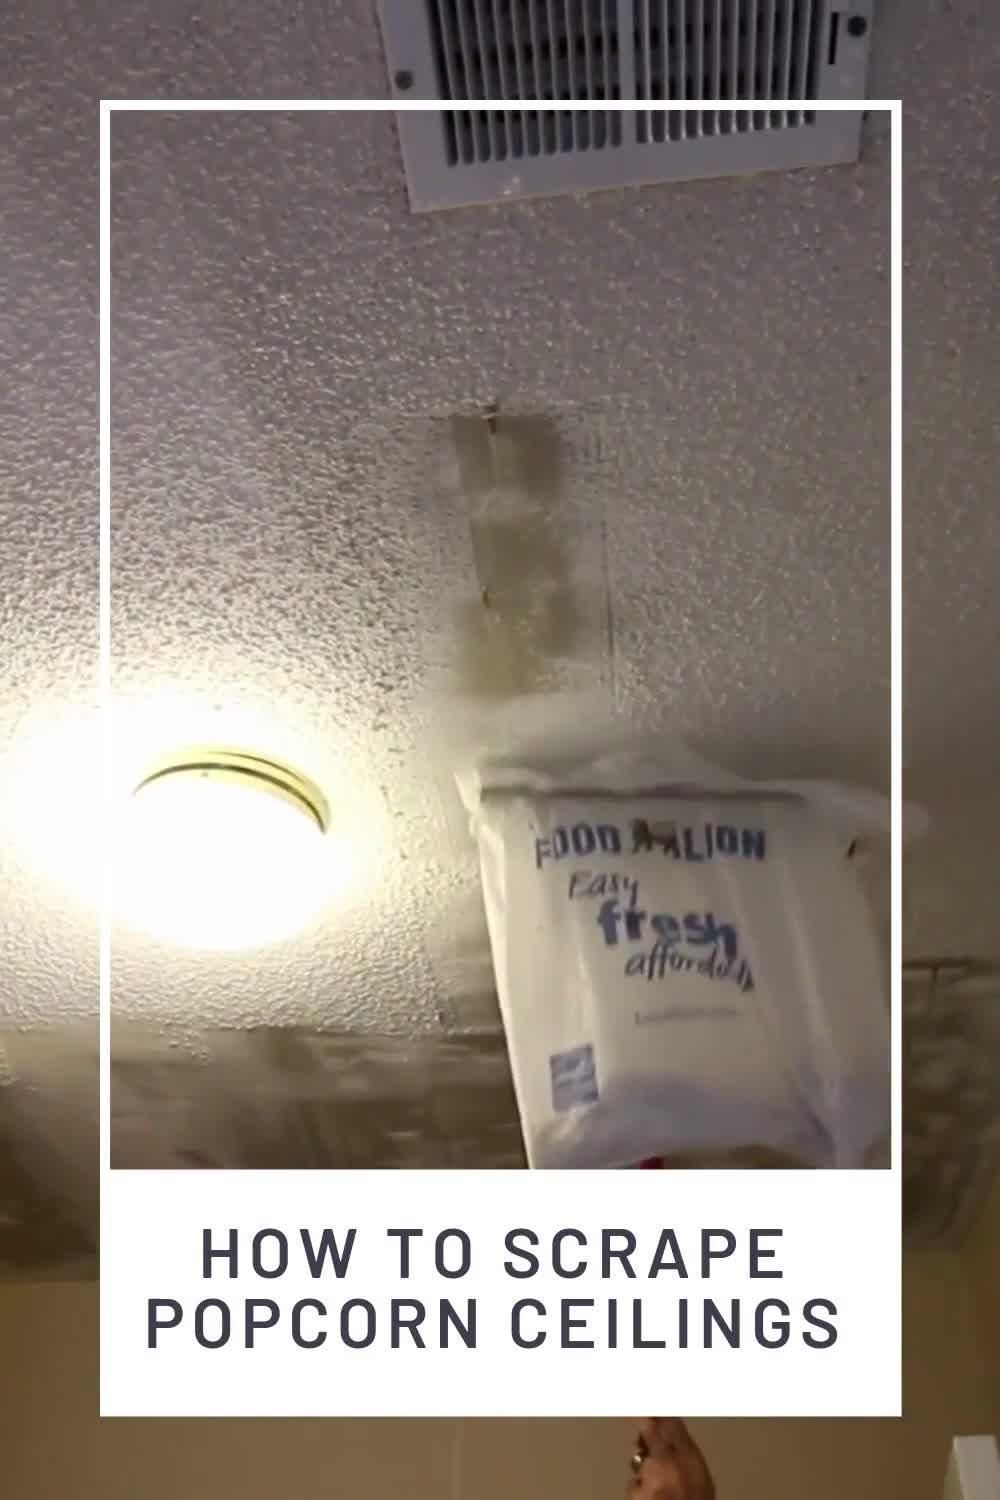 Our Top Tips on How to Scrape Popcorn Ceilings - Our Top Tips on How to Scrape Popcorn Ceilings -   diy House improvements